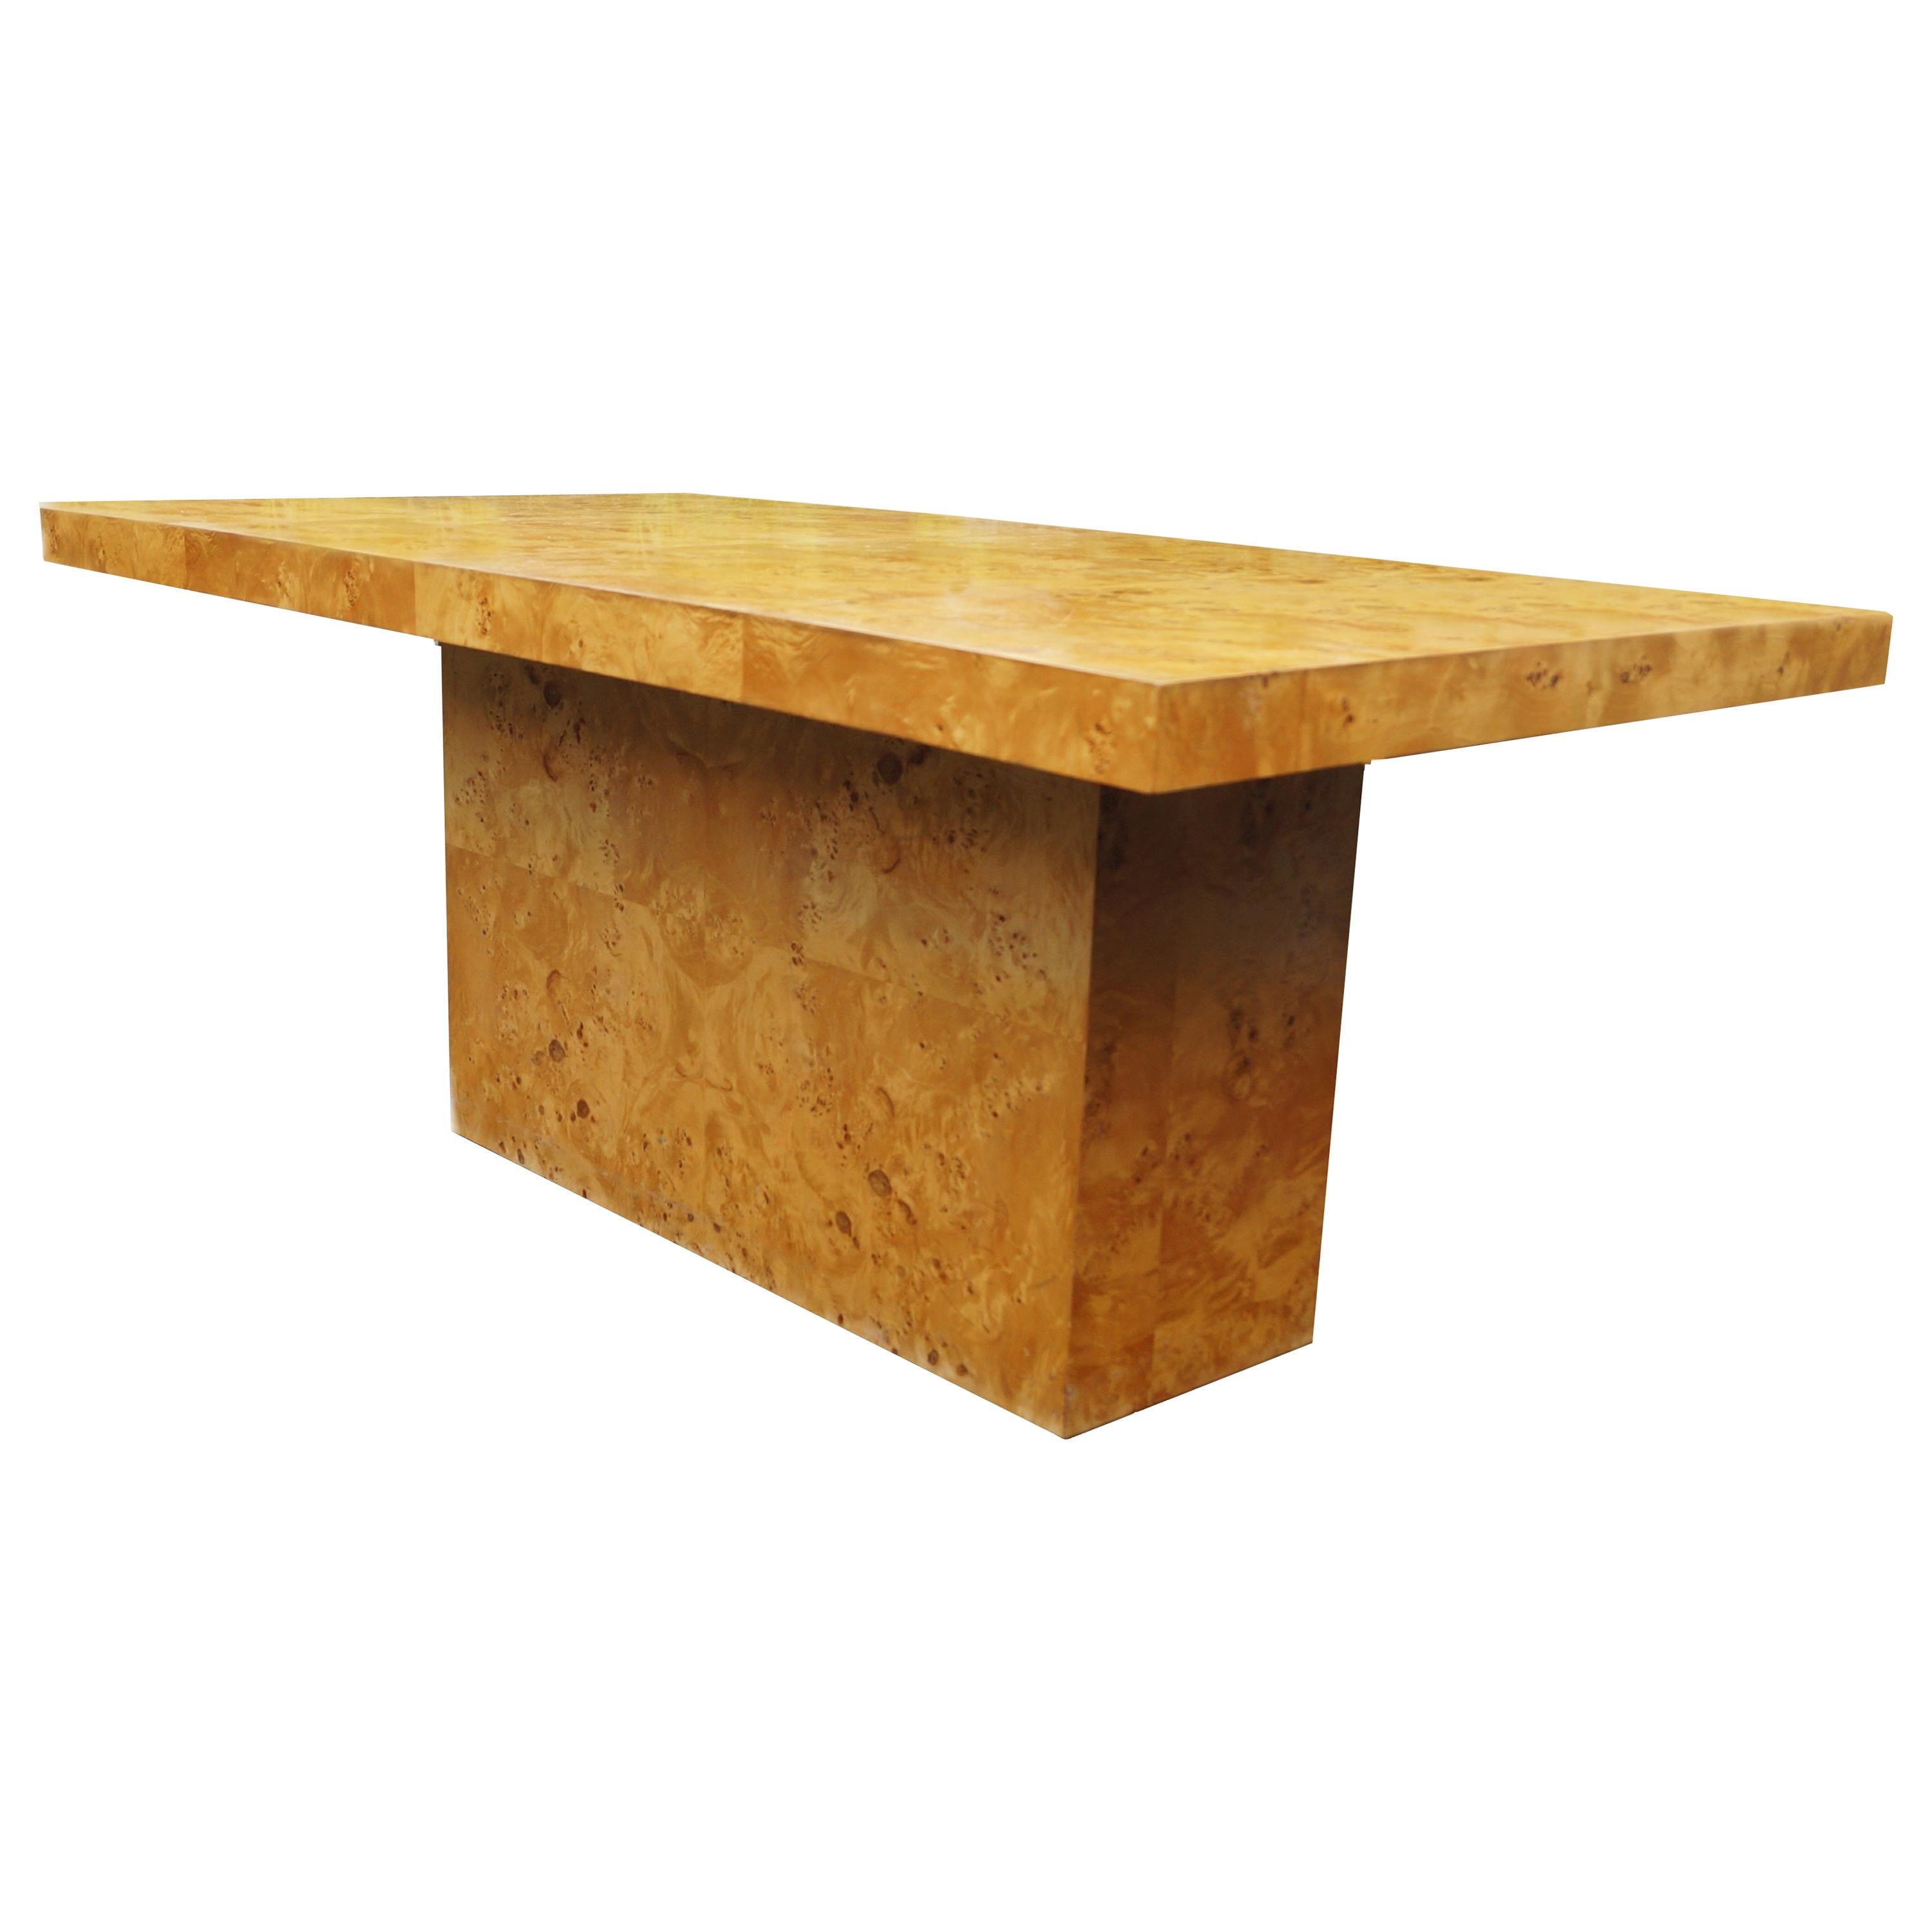 Milo Baughman Thayer Coggin Burl Wood Dining Table with Leaves